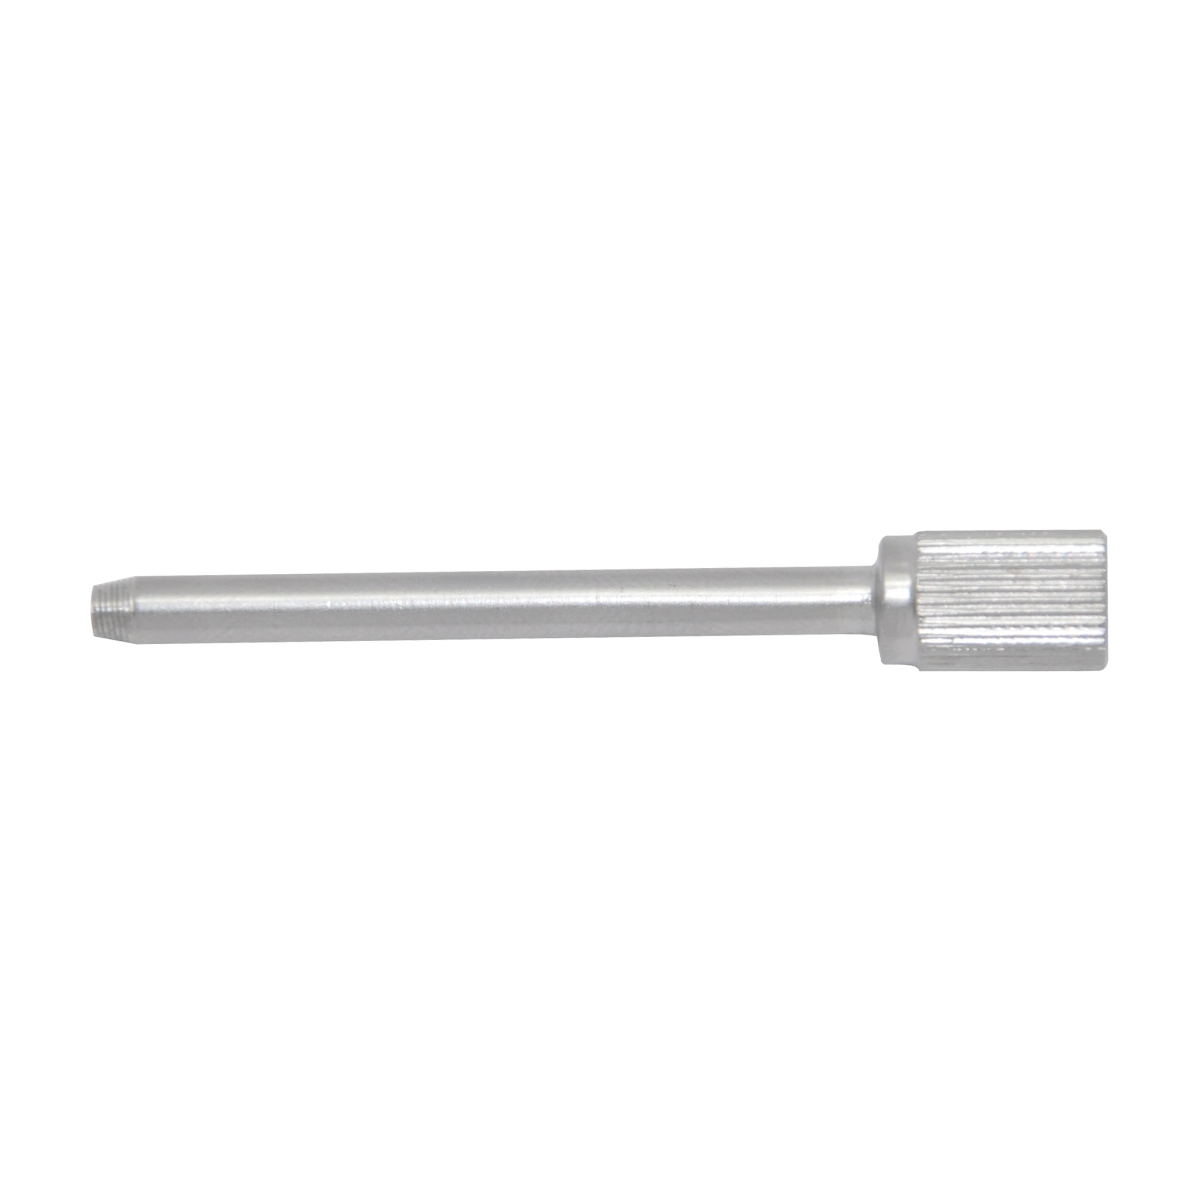 LCP Drill Sleeve 3.5mm (for 2.8mm Drill Bit)